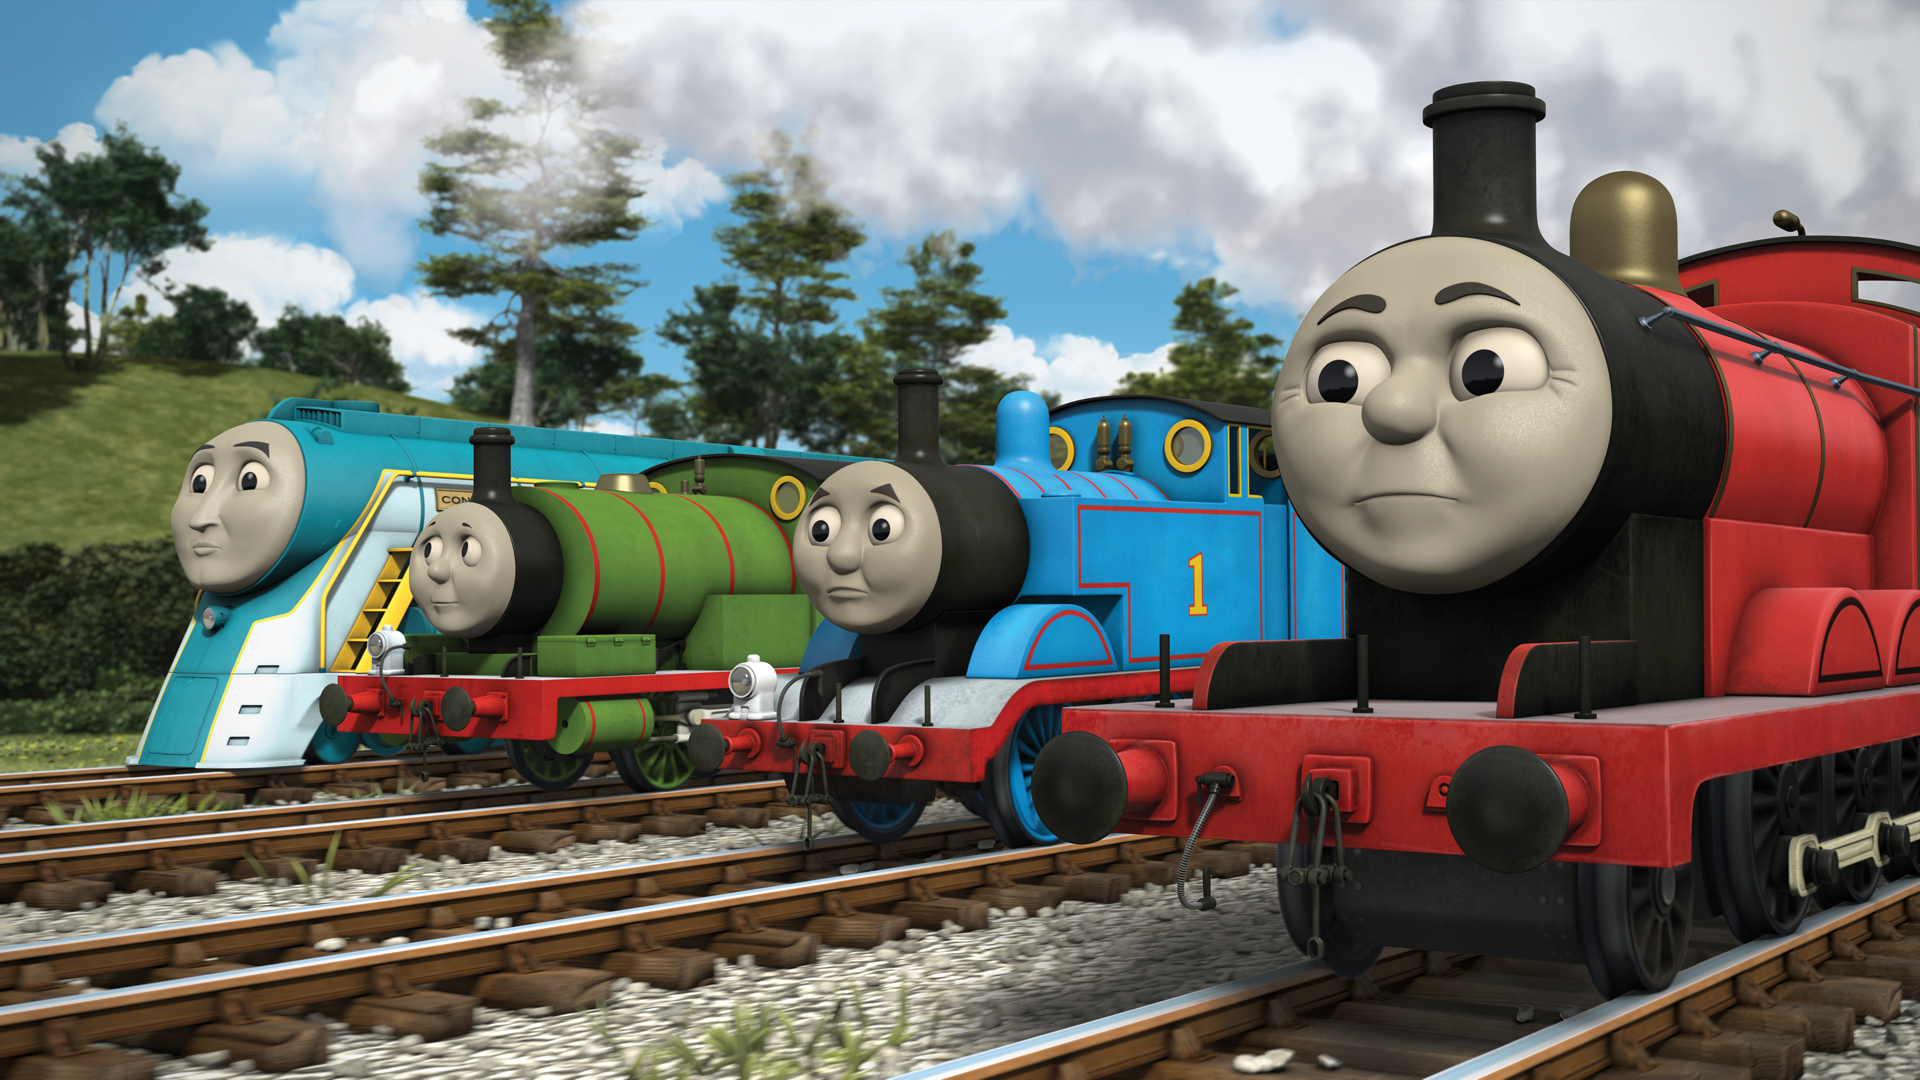 Wallpapers Thomas And Friends Hd For 1920x1080 | #1227986 #thomas ...